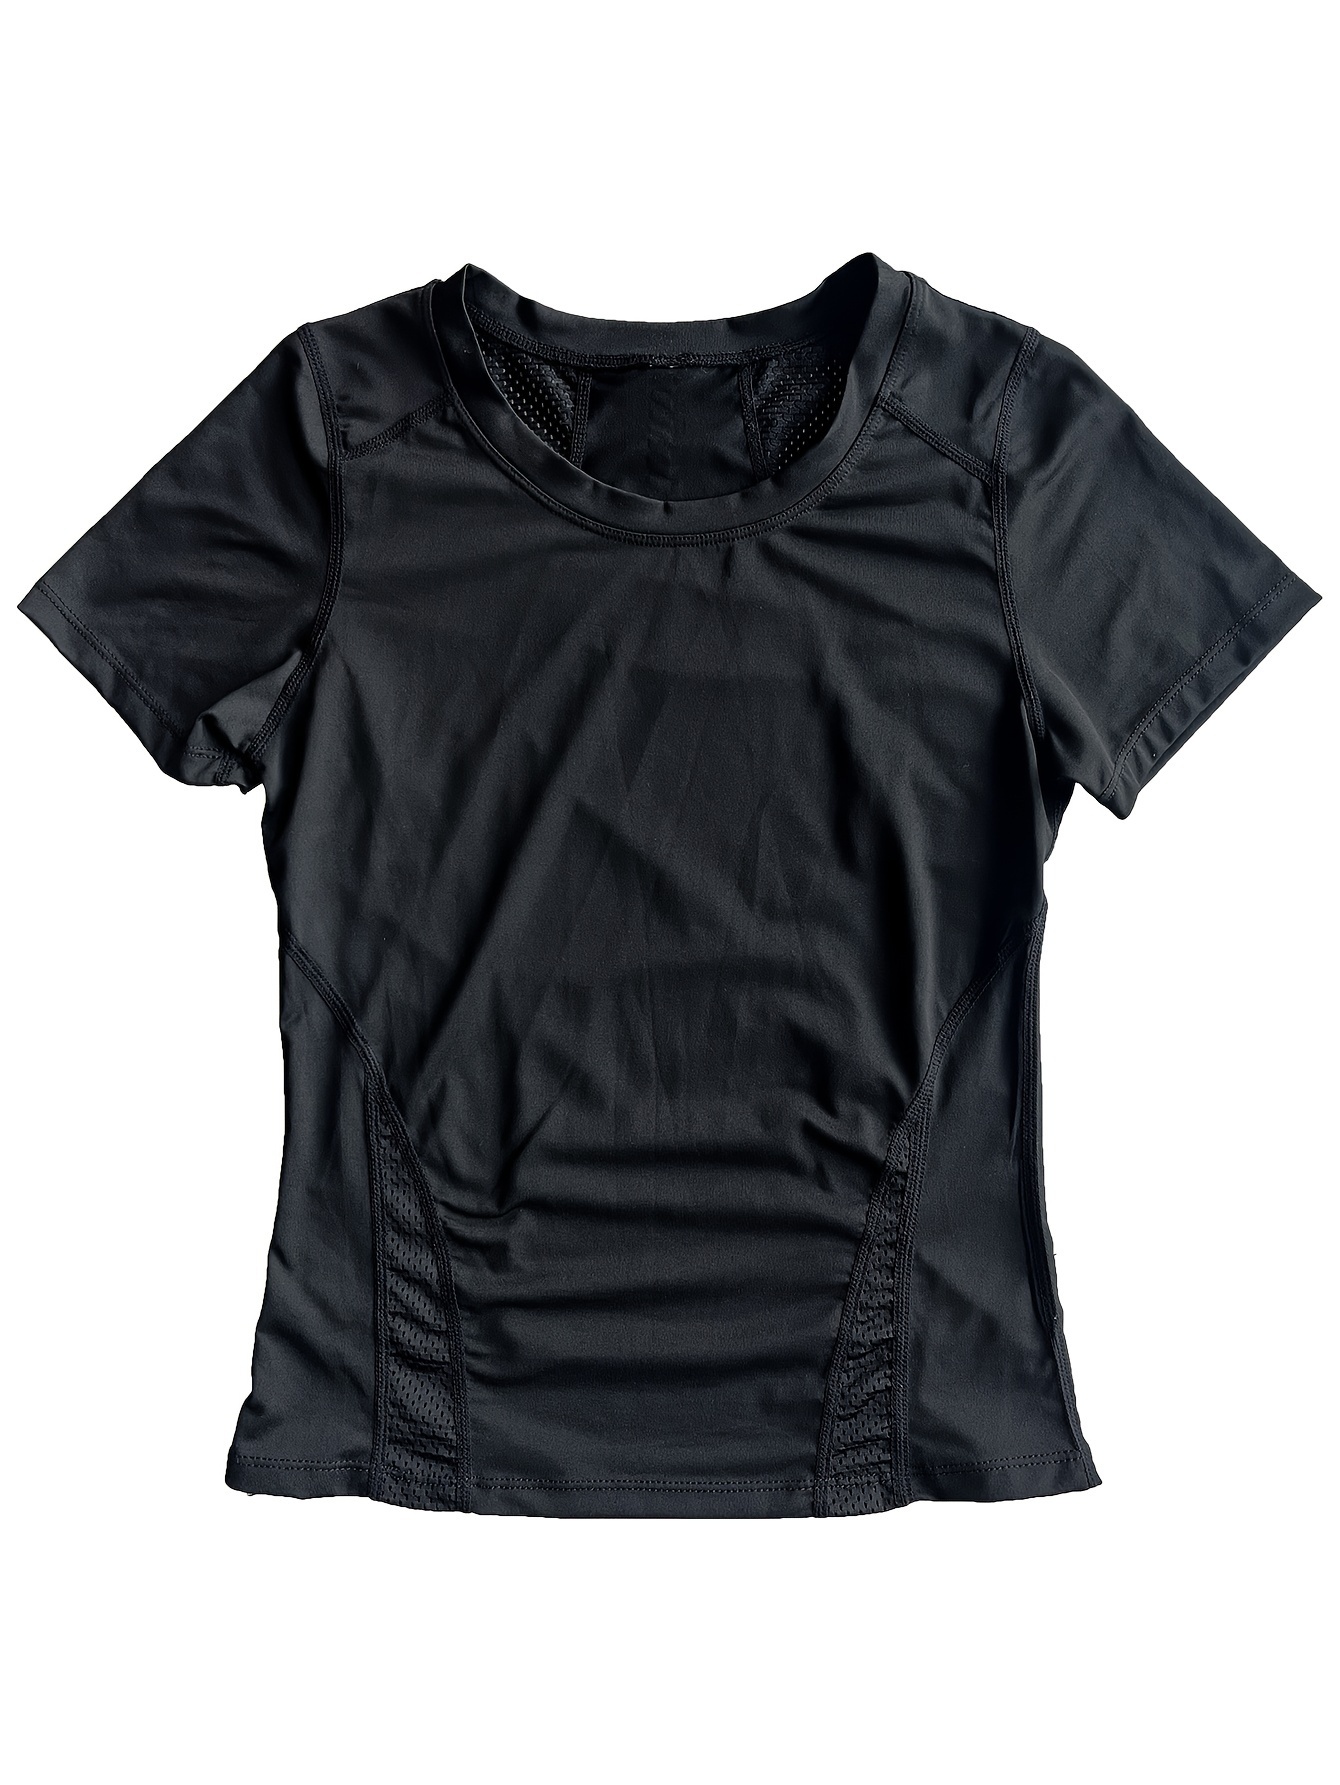 Womens Under Armour T Shirts, Sports & Running T-Shirts